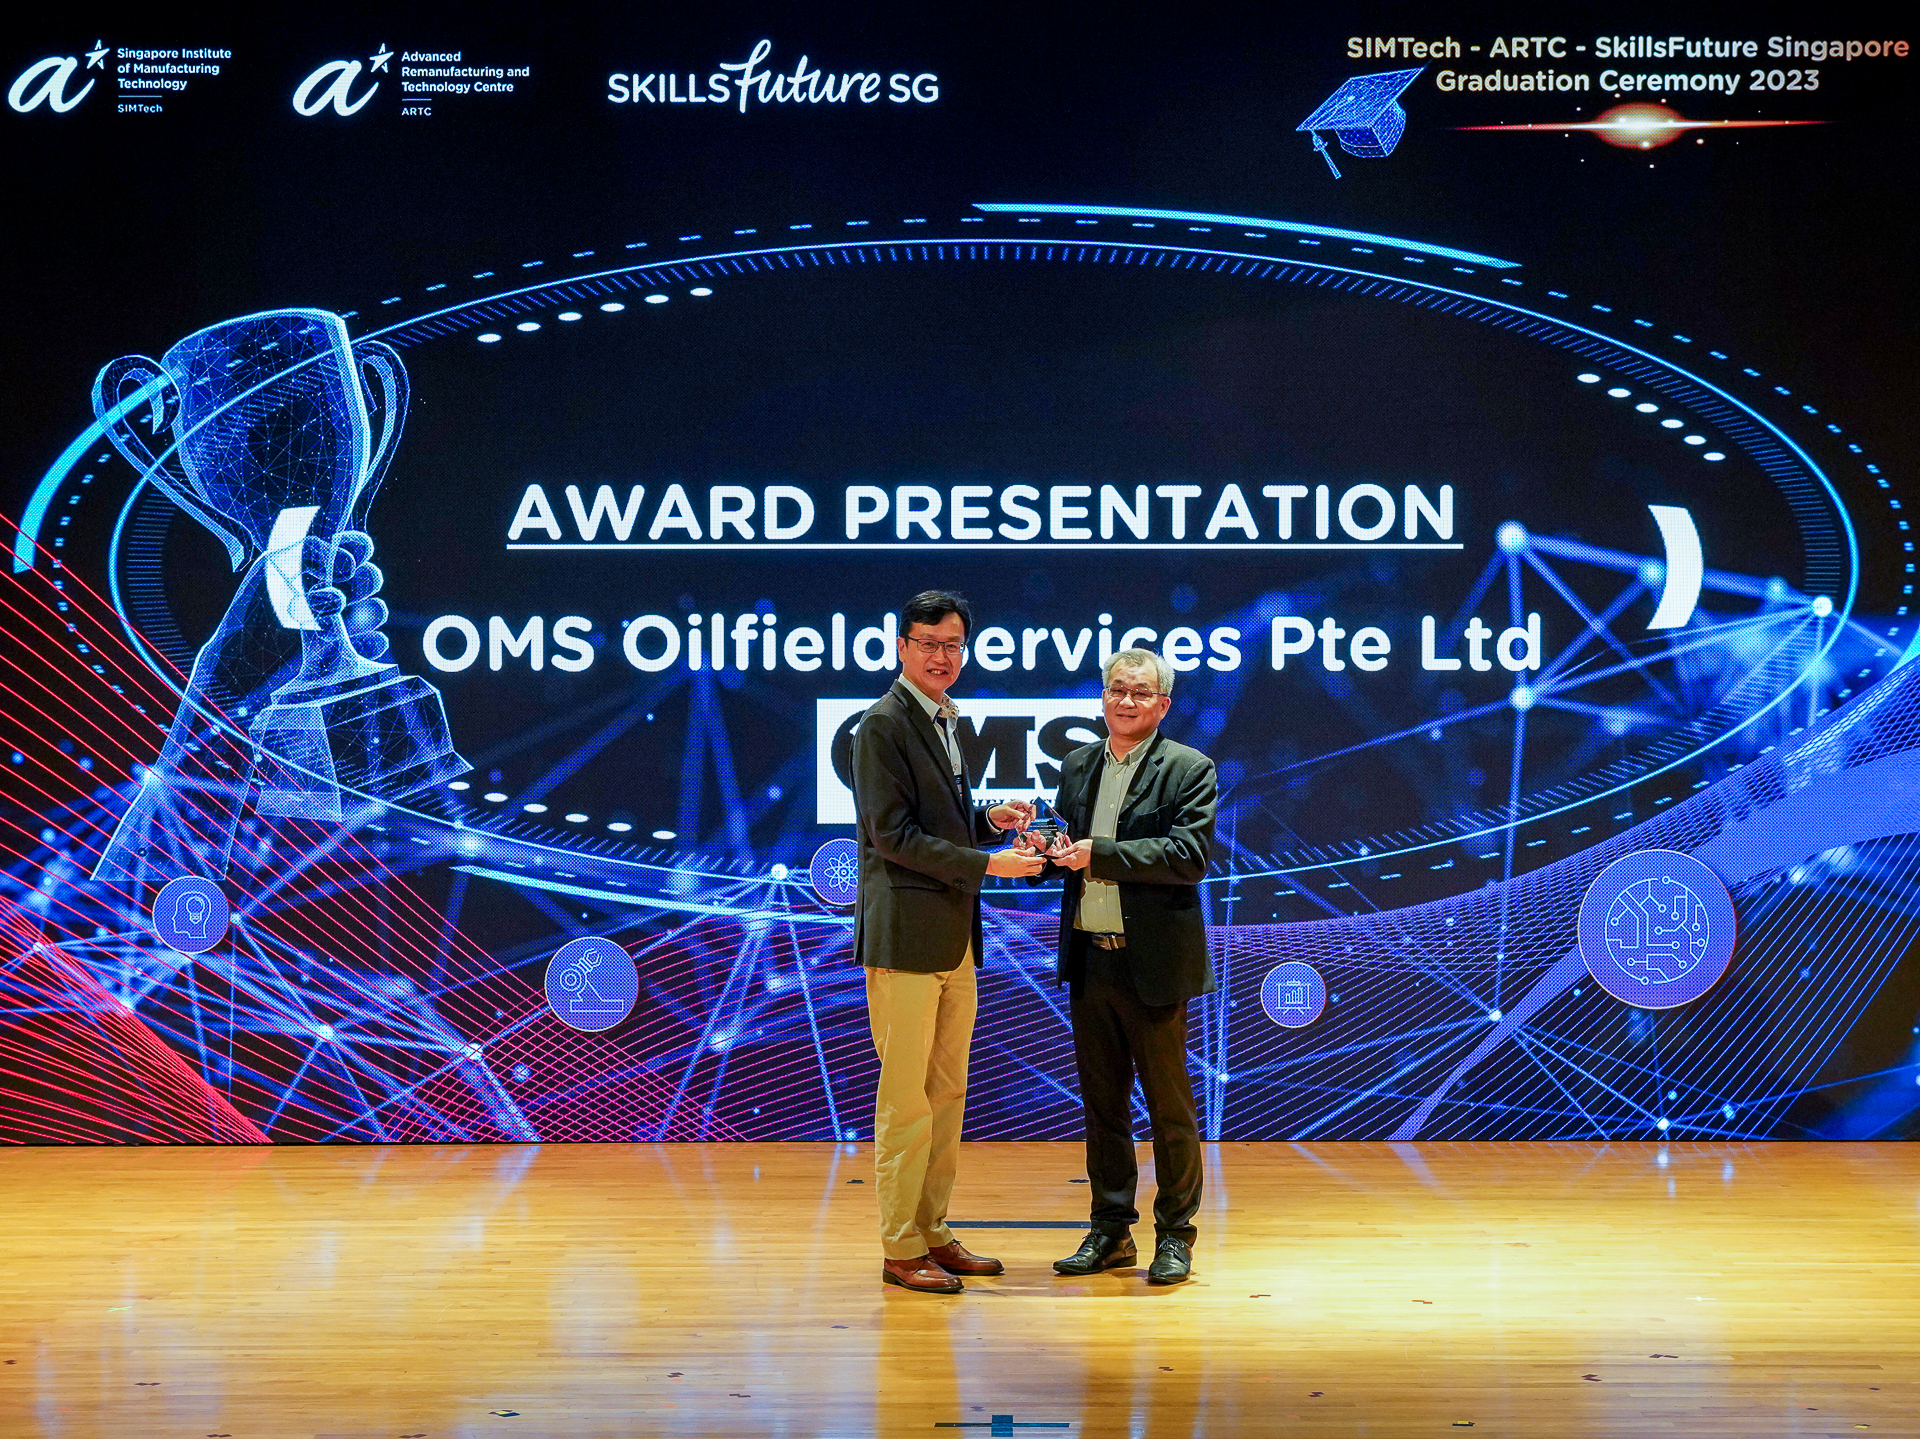 OMS Singapore Receives Best Industry Partner Award from SIMTech